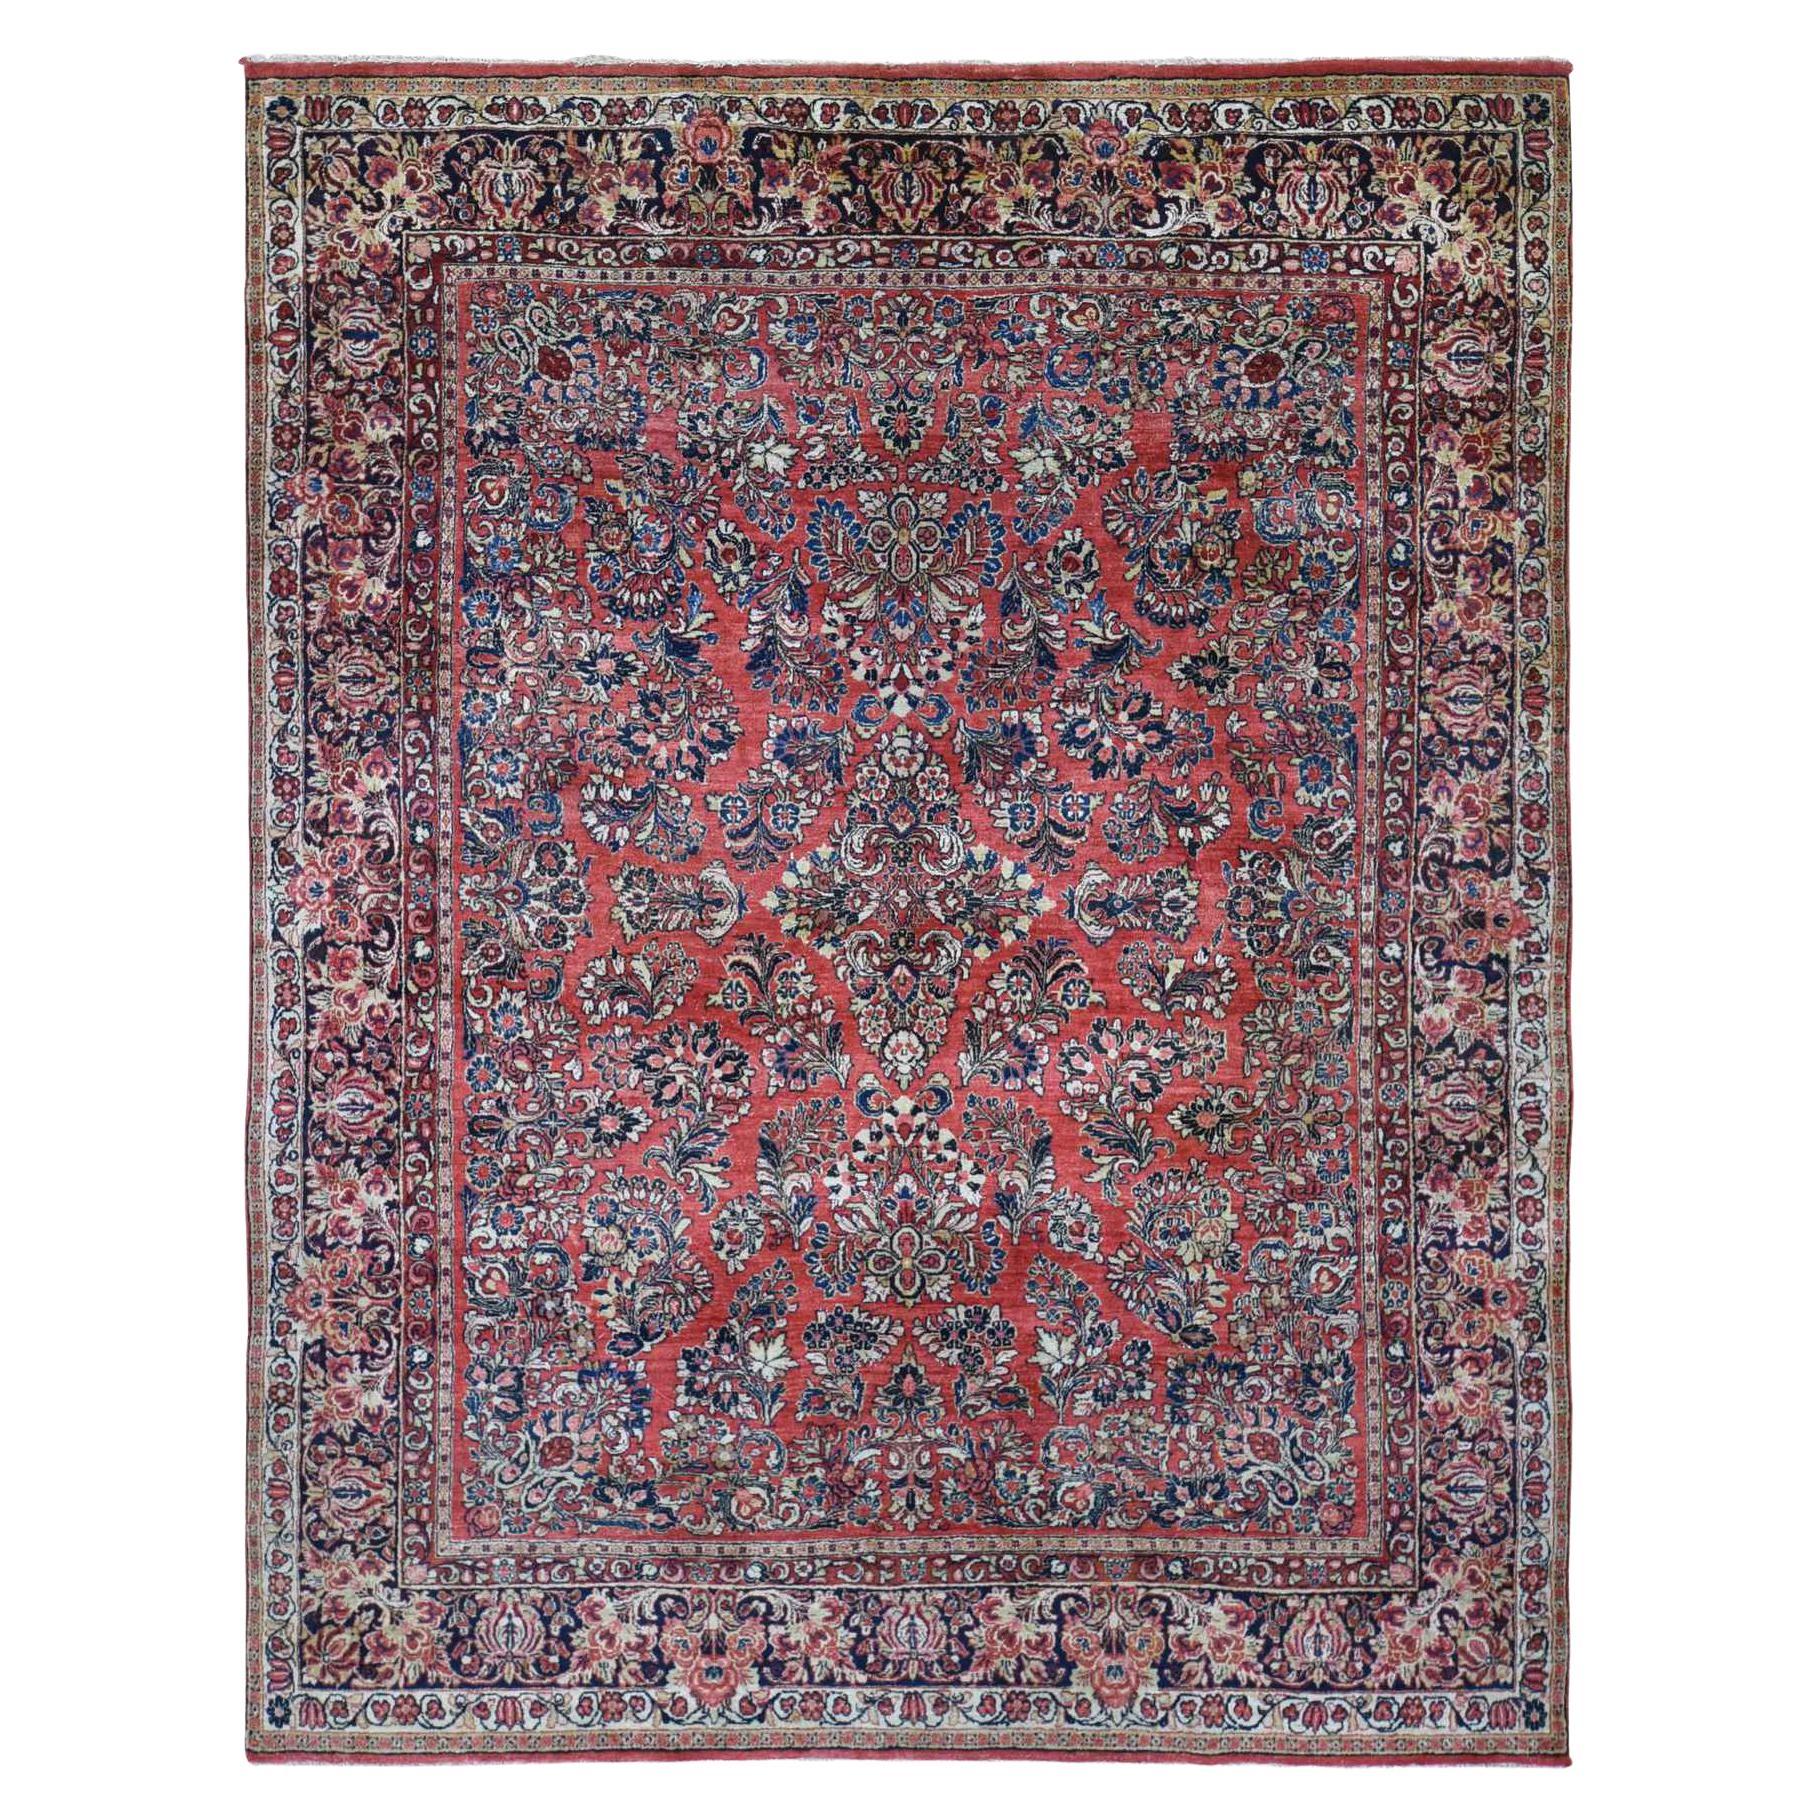 Tomato Red, Antique Persian Sarouk, Flower Bouquet Design, Hand Knotted Wool Rug